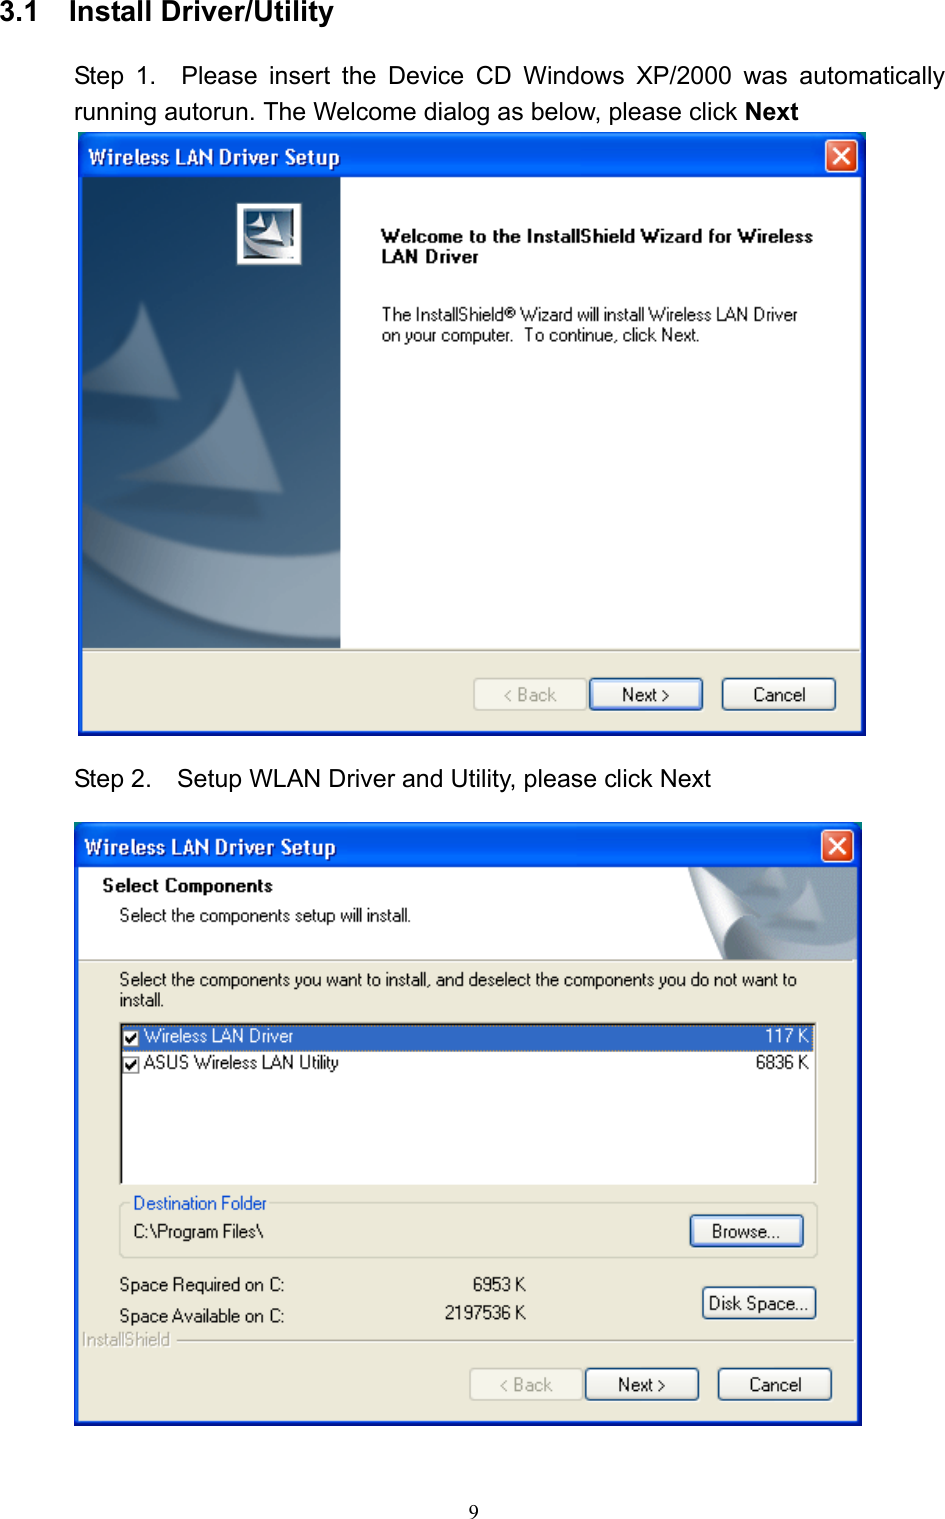   9 3.1  Install Driver/Utility  Step 1.  Please insert the Device CD Windows XP/2000 was automatically running autorun. The Welcome dialog as below, please click Next   Step 2.    Setup WLAN Driver and Utility, please click Next     